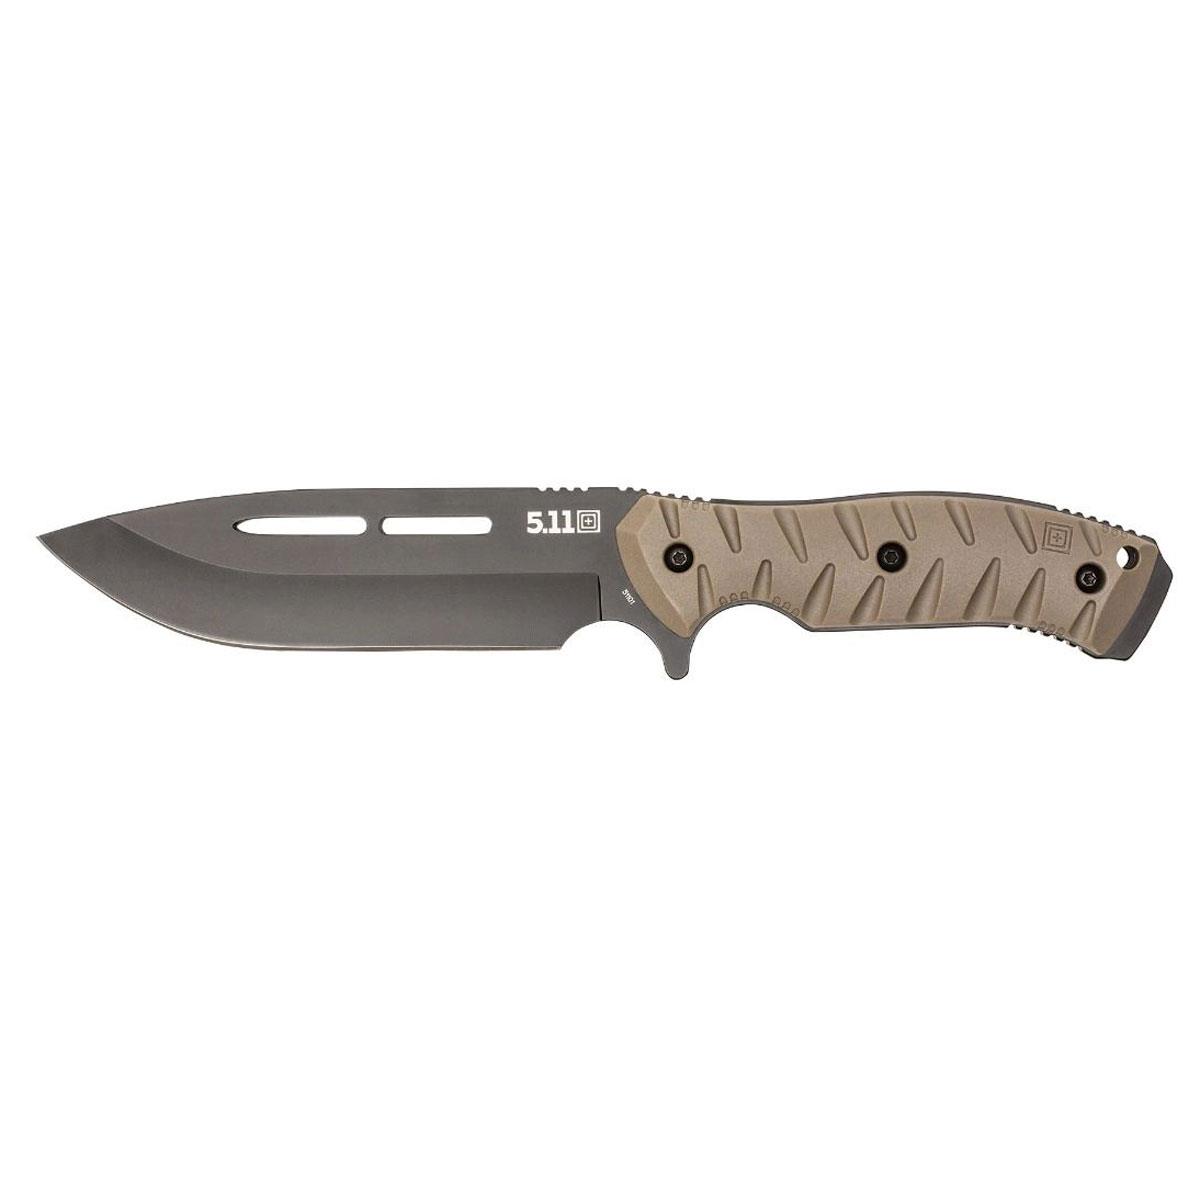 Image of 5.11 Tactical CFK 7 Peacemaker Fixed Knife